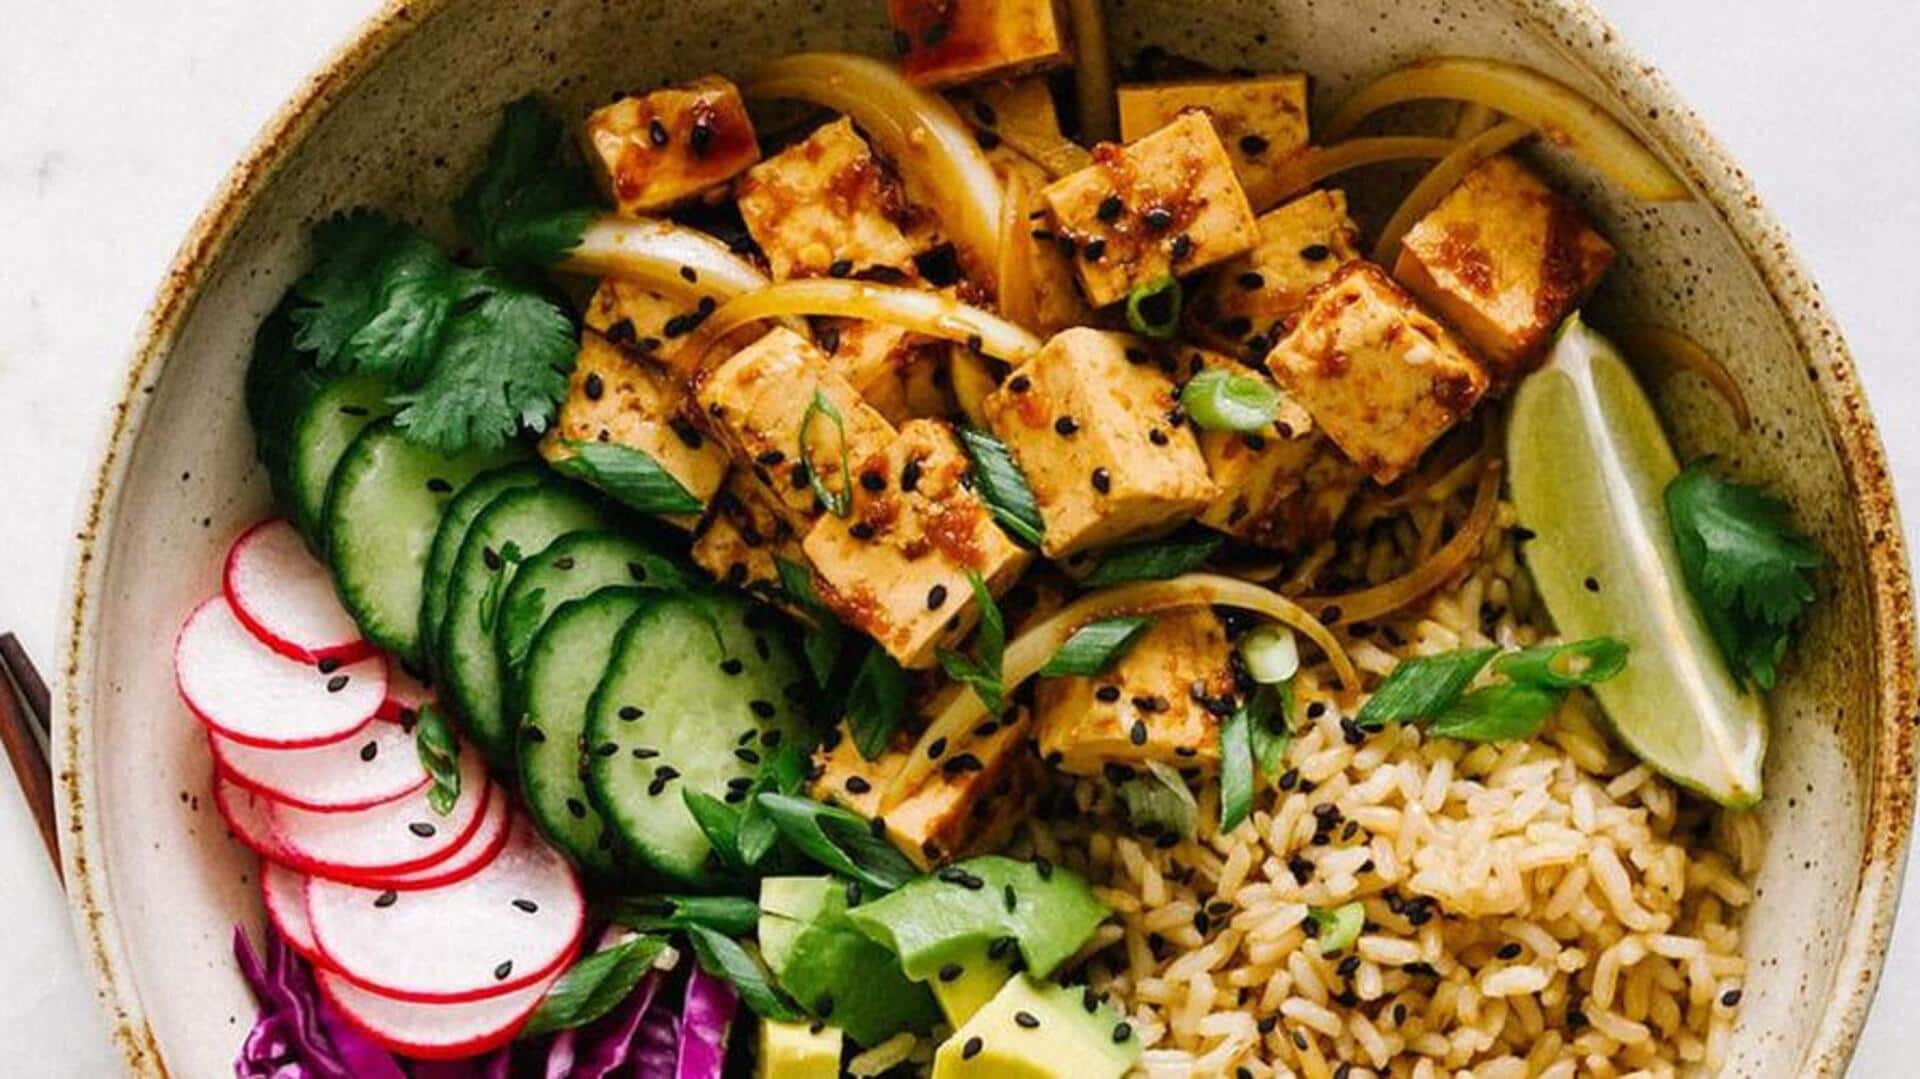 Impress your guests with this tempting tofu teriyaki recipe